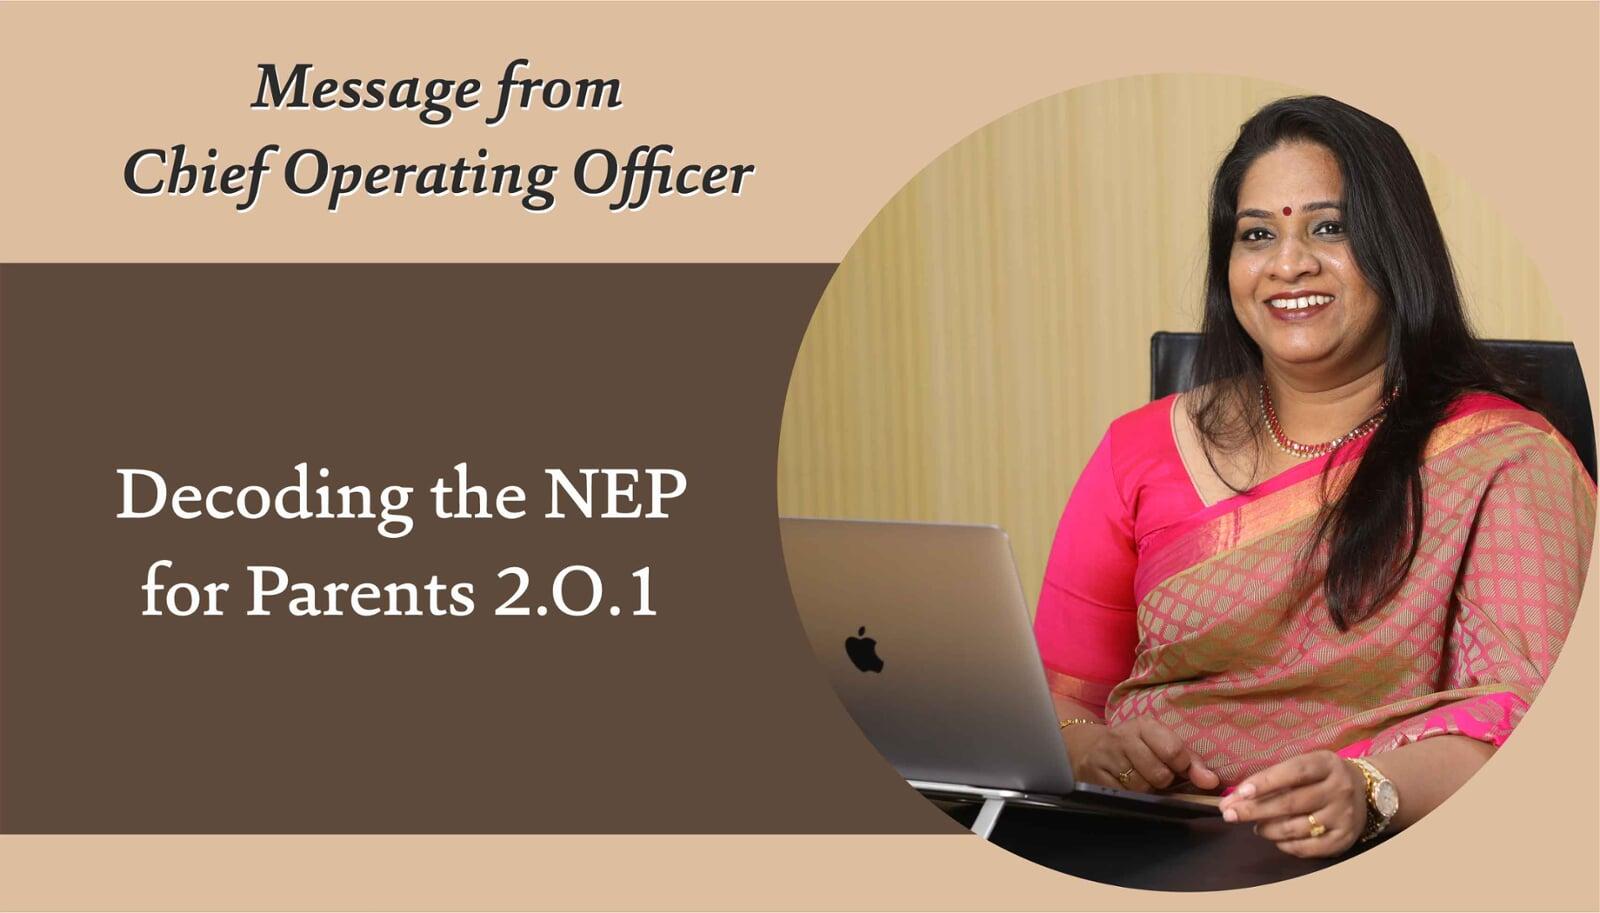 Decoding the NEP for Parents 2.0.1